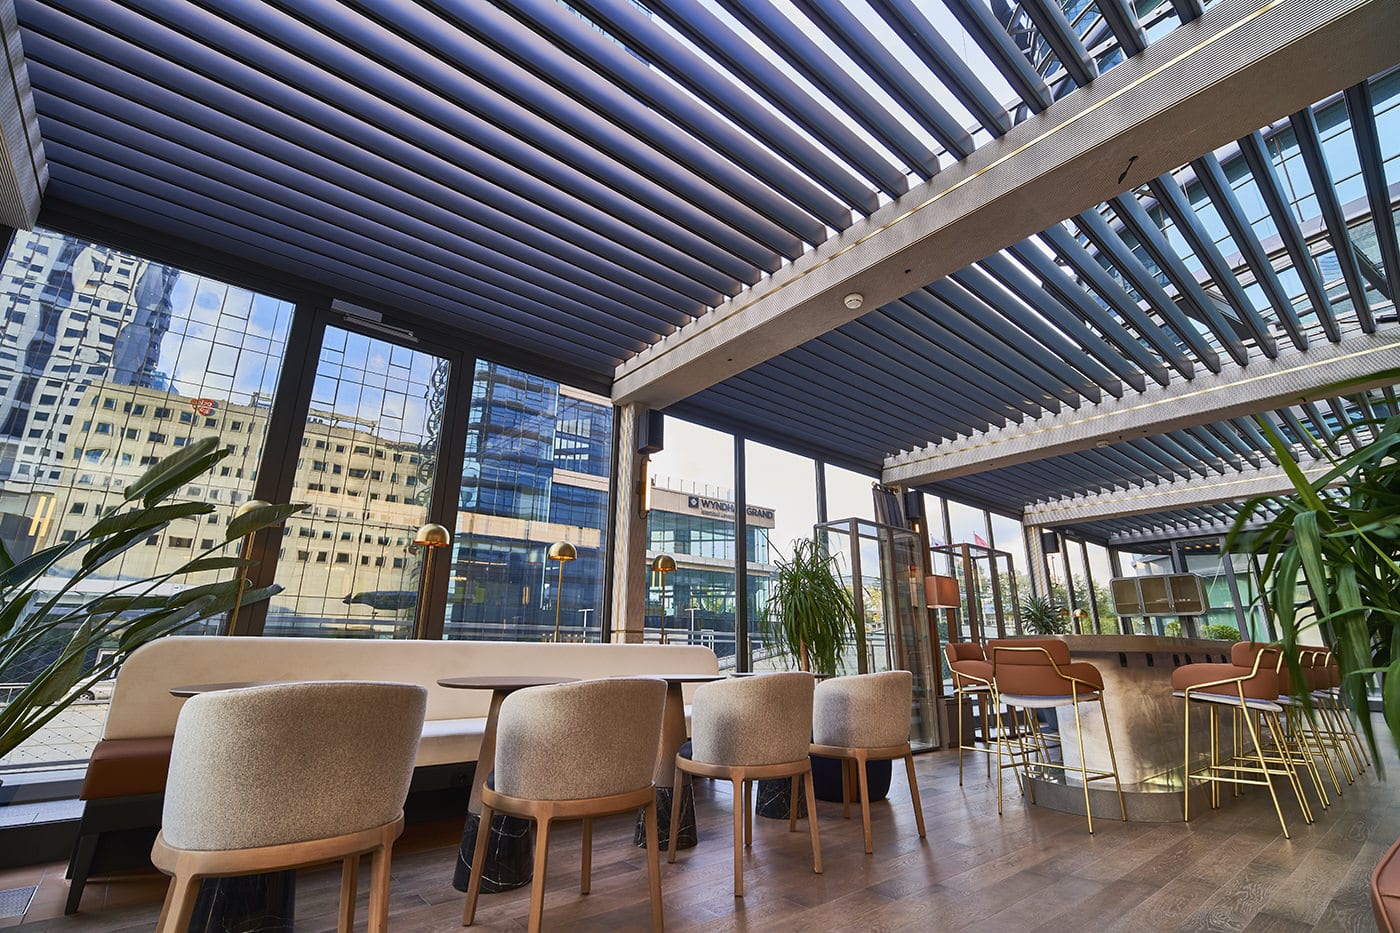 Commercial pergola dining area installed with Luxaflex Retractable Awnings.